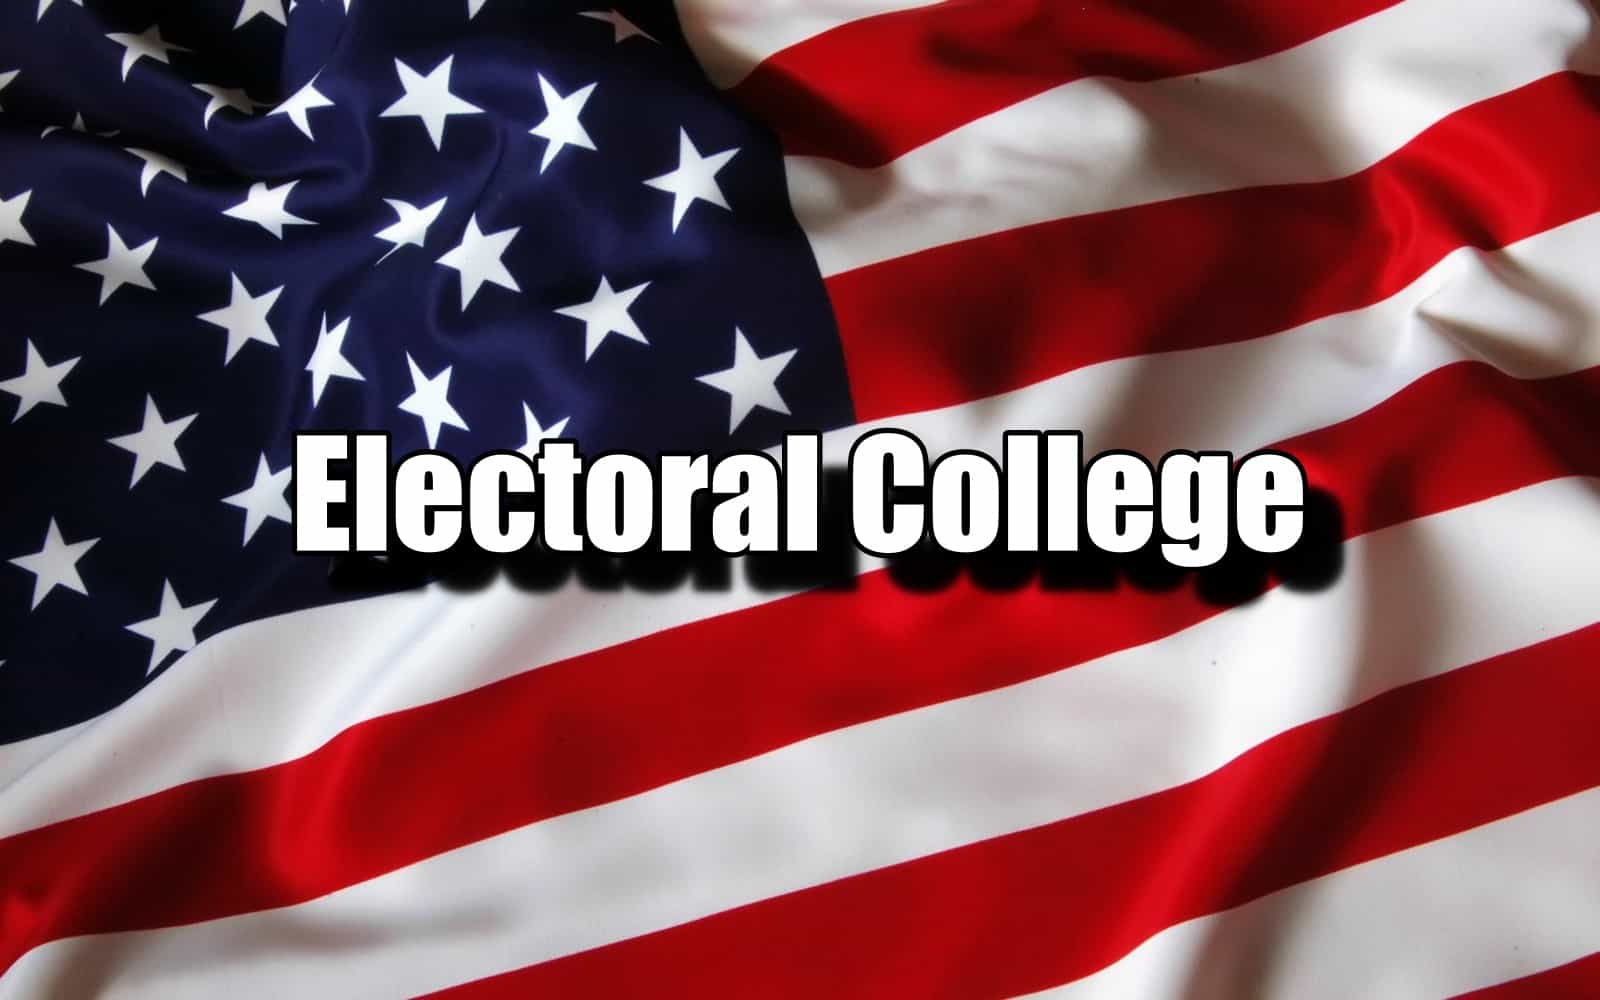 DONALD TRUMP “WON THE ELECTION” AND EXPECTS THE  ELECTORAL COLLEGE TO VOTE FOR HIM ON DEC. 14